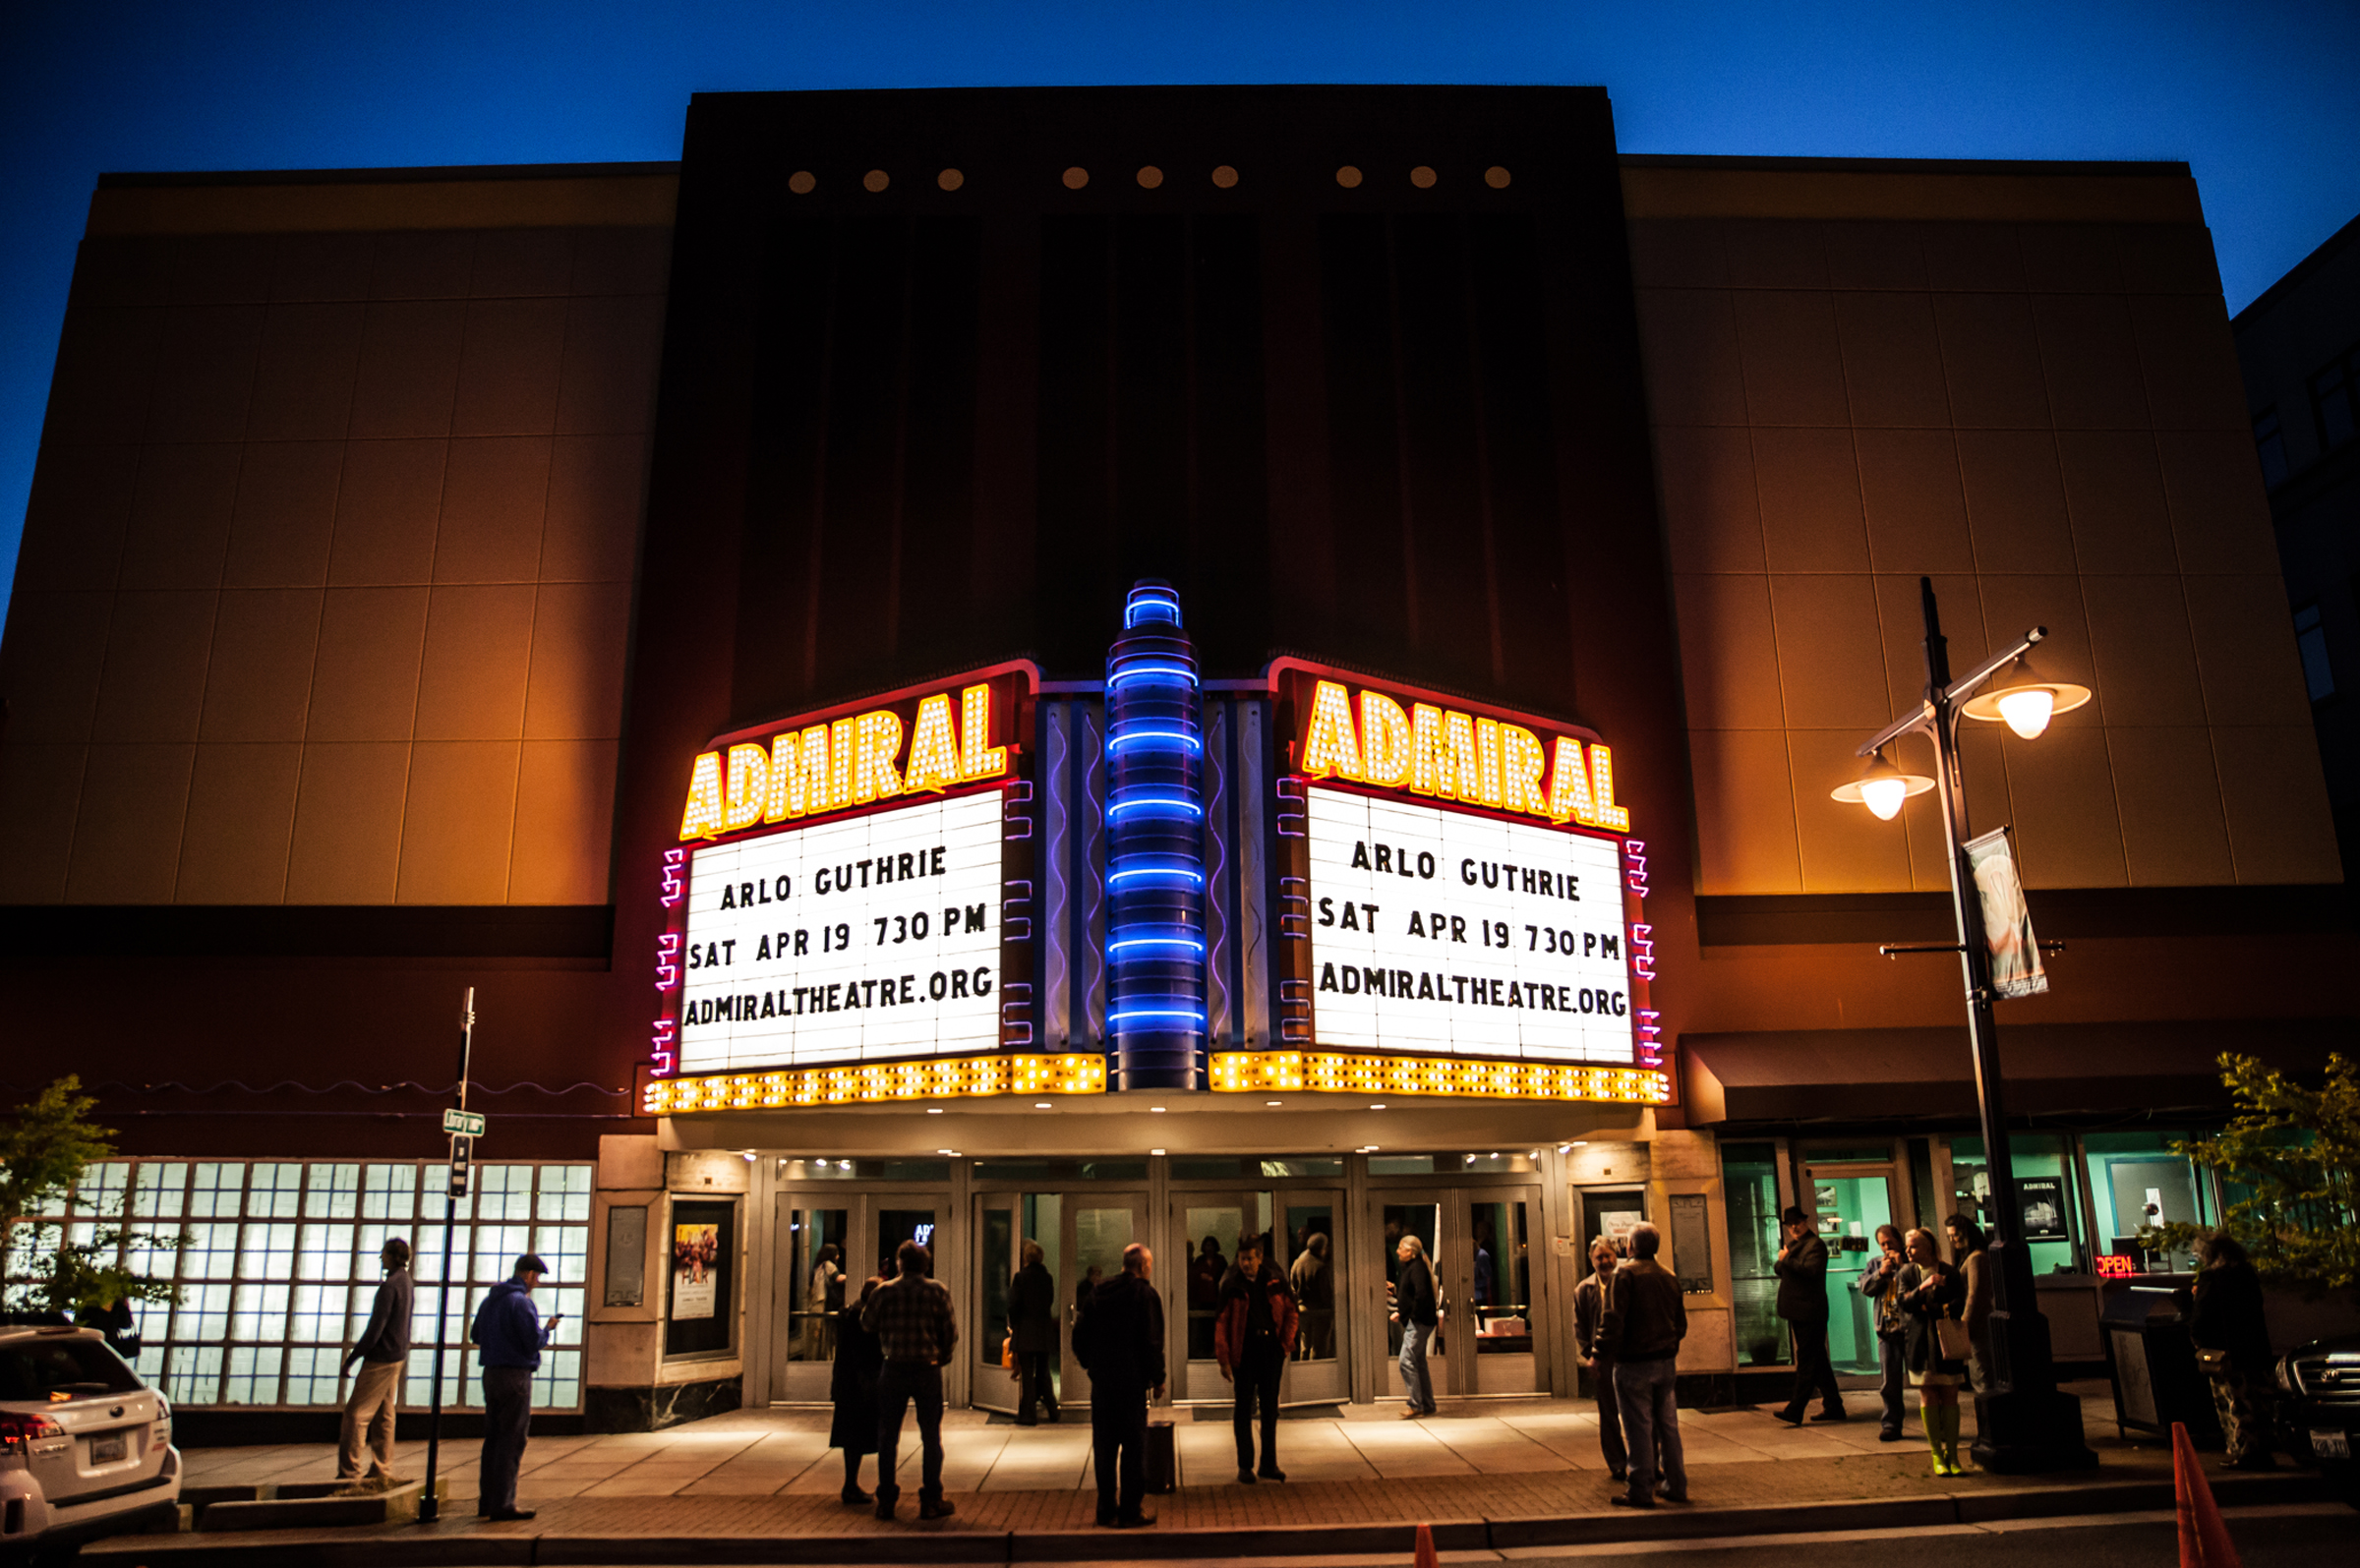 The Admiral Theatre welcomes more than 50,000 patrons annually to 110 diverse performances and community events.